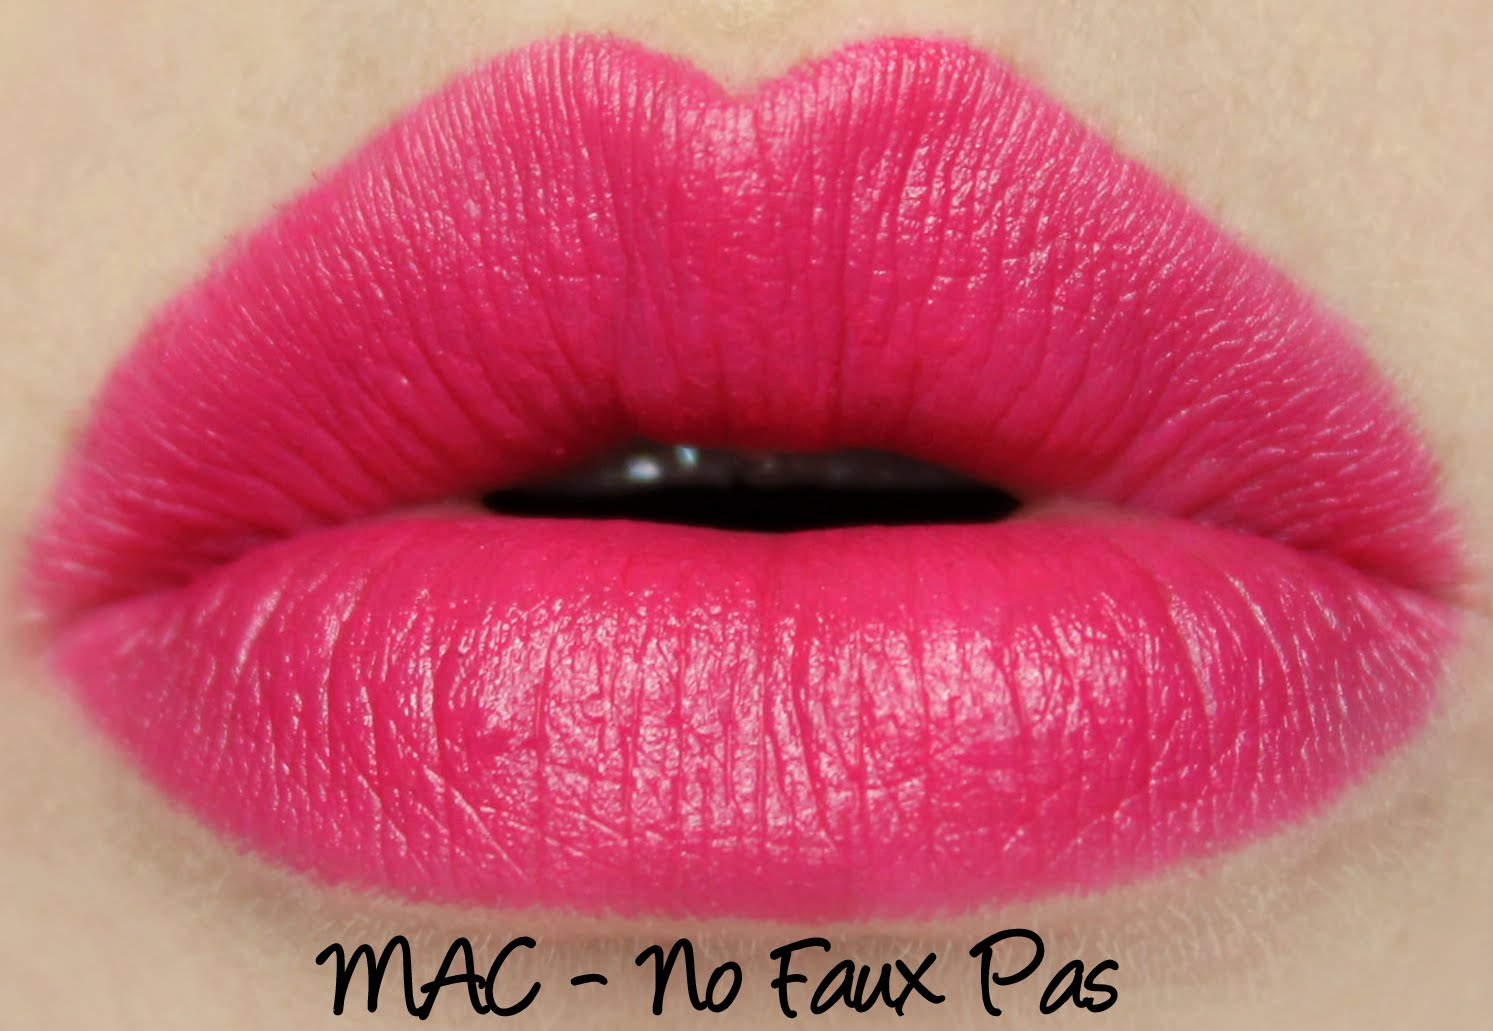 MAC Heirloom Mix Lipstick - No Faux Pas Swatches & Review